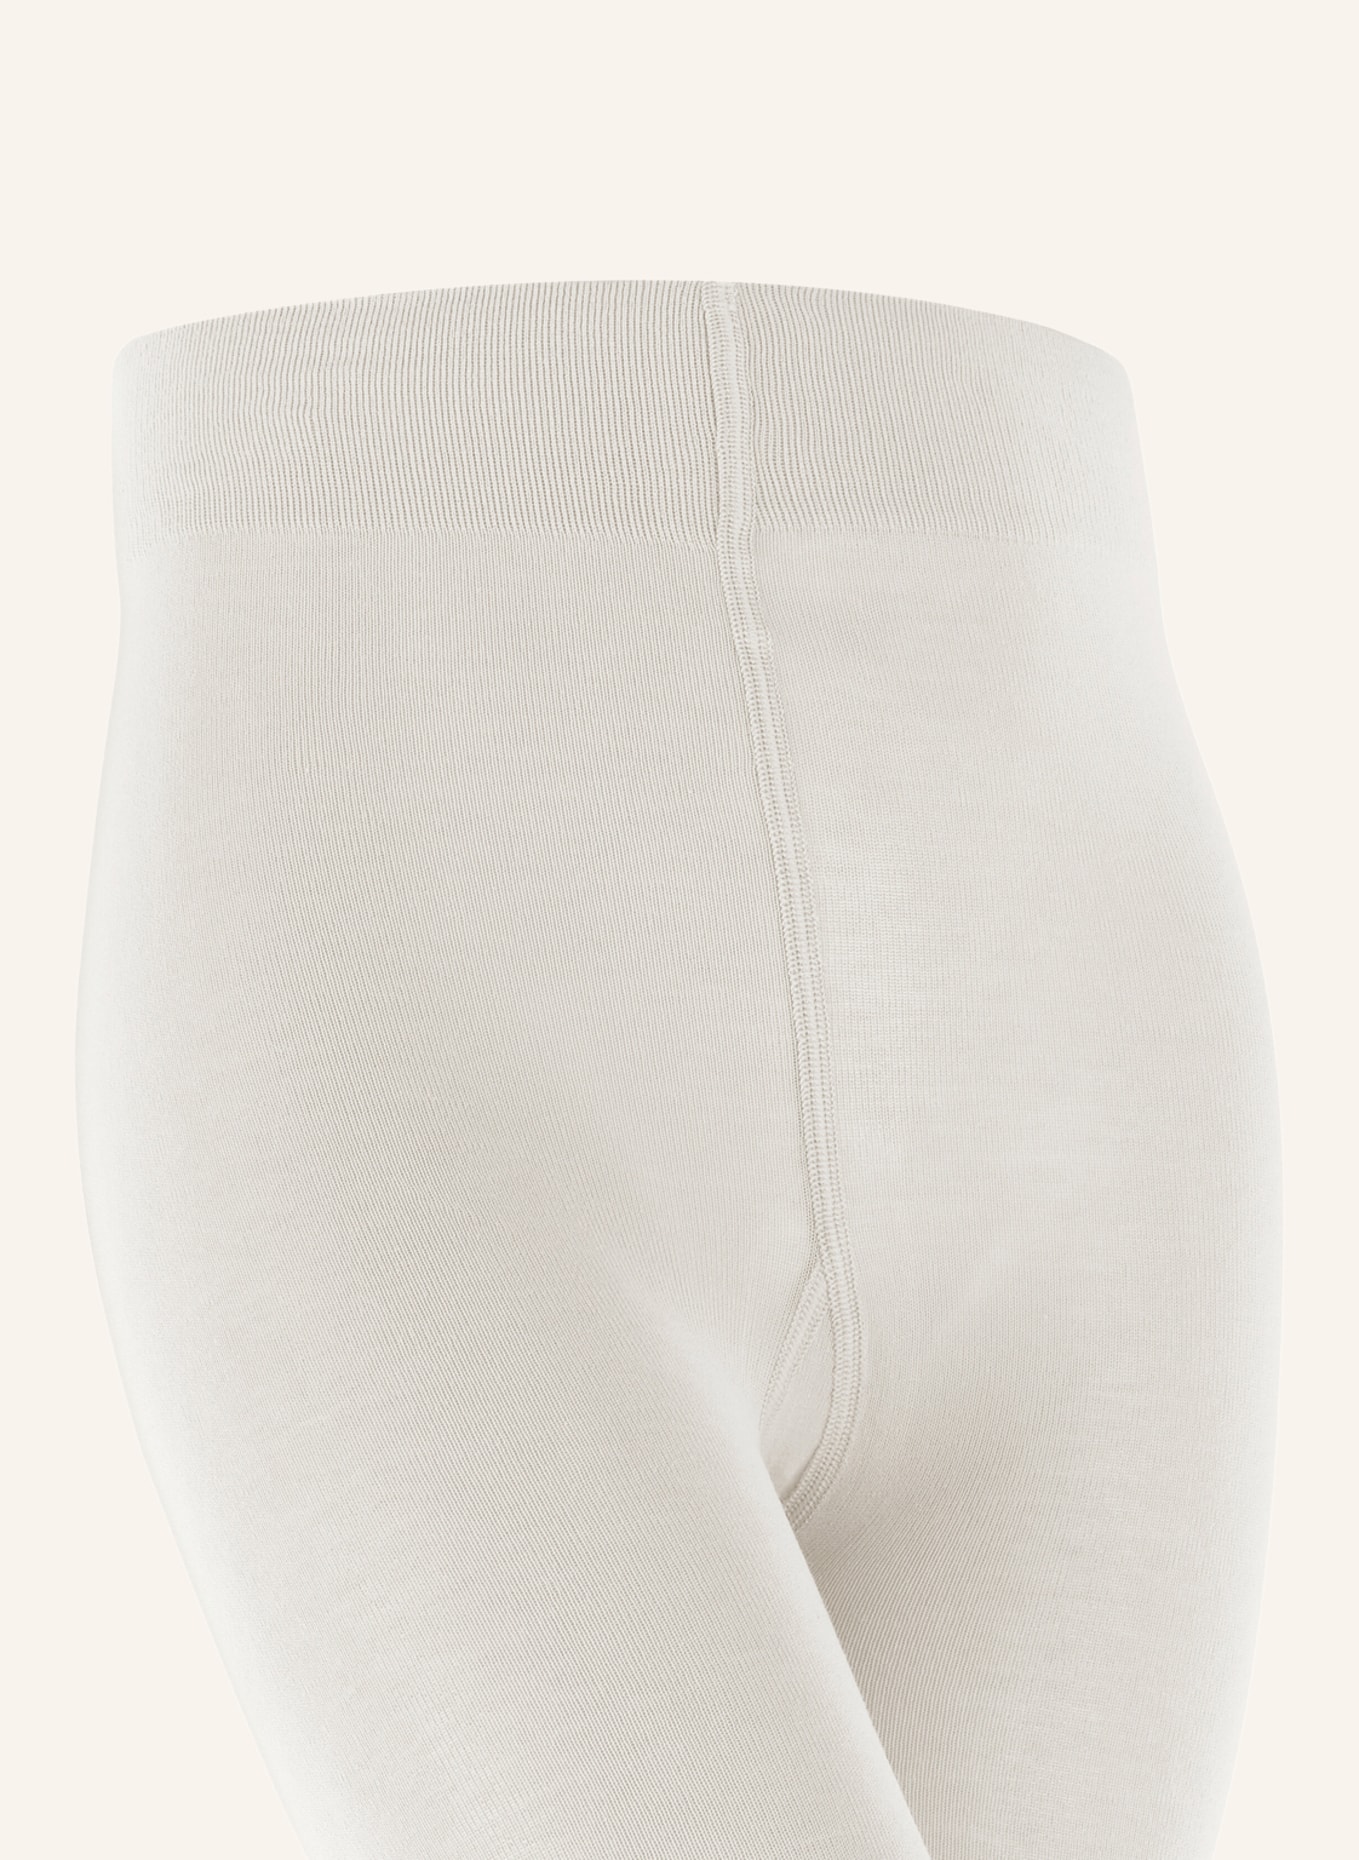 FALKE Pantyhose COTTON TOUCH, Color: 2040 off-white (Image 2)